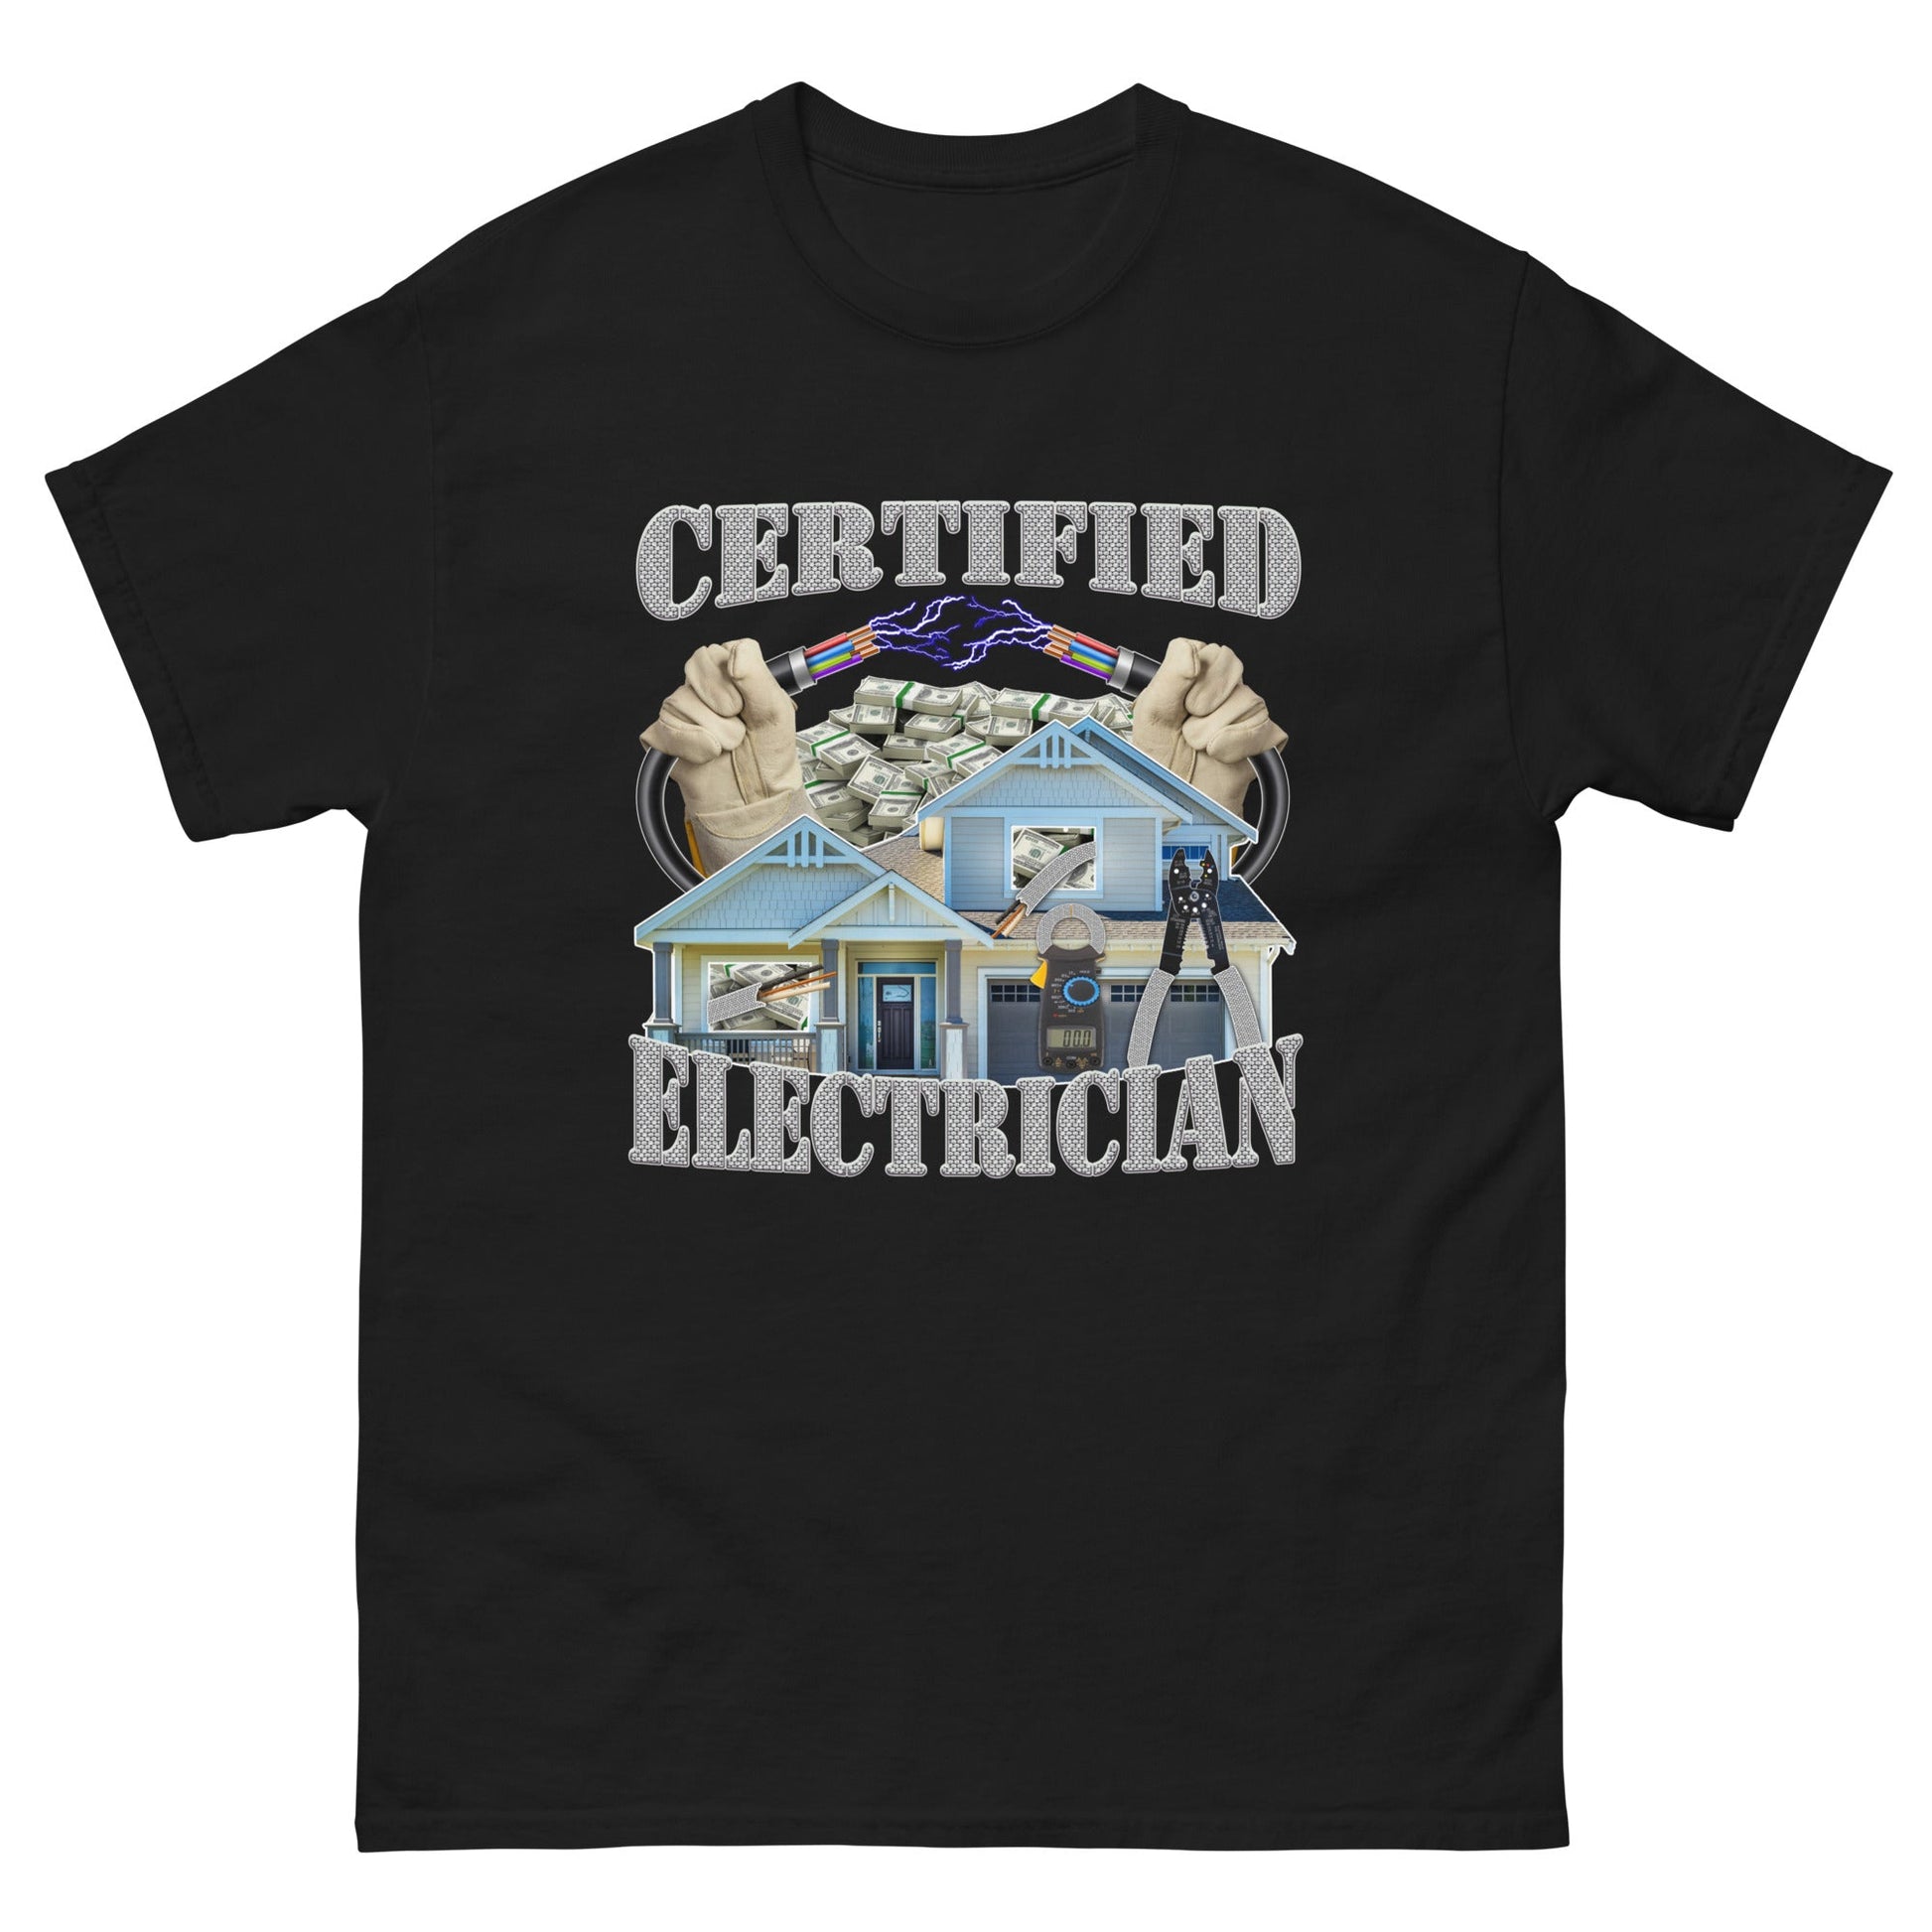 CERTIFIED ELECTRICIAN - HardShirts